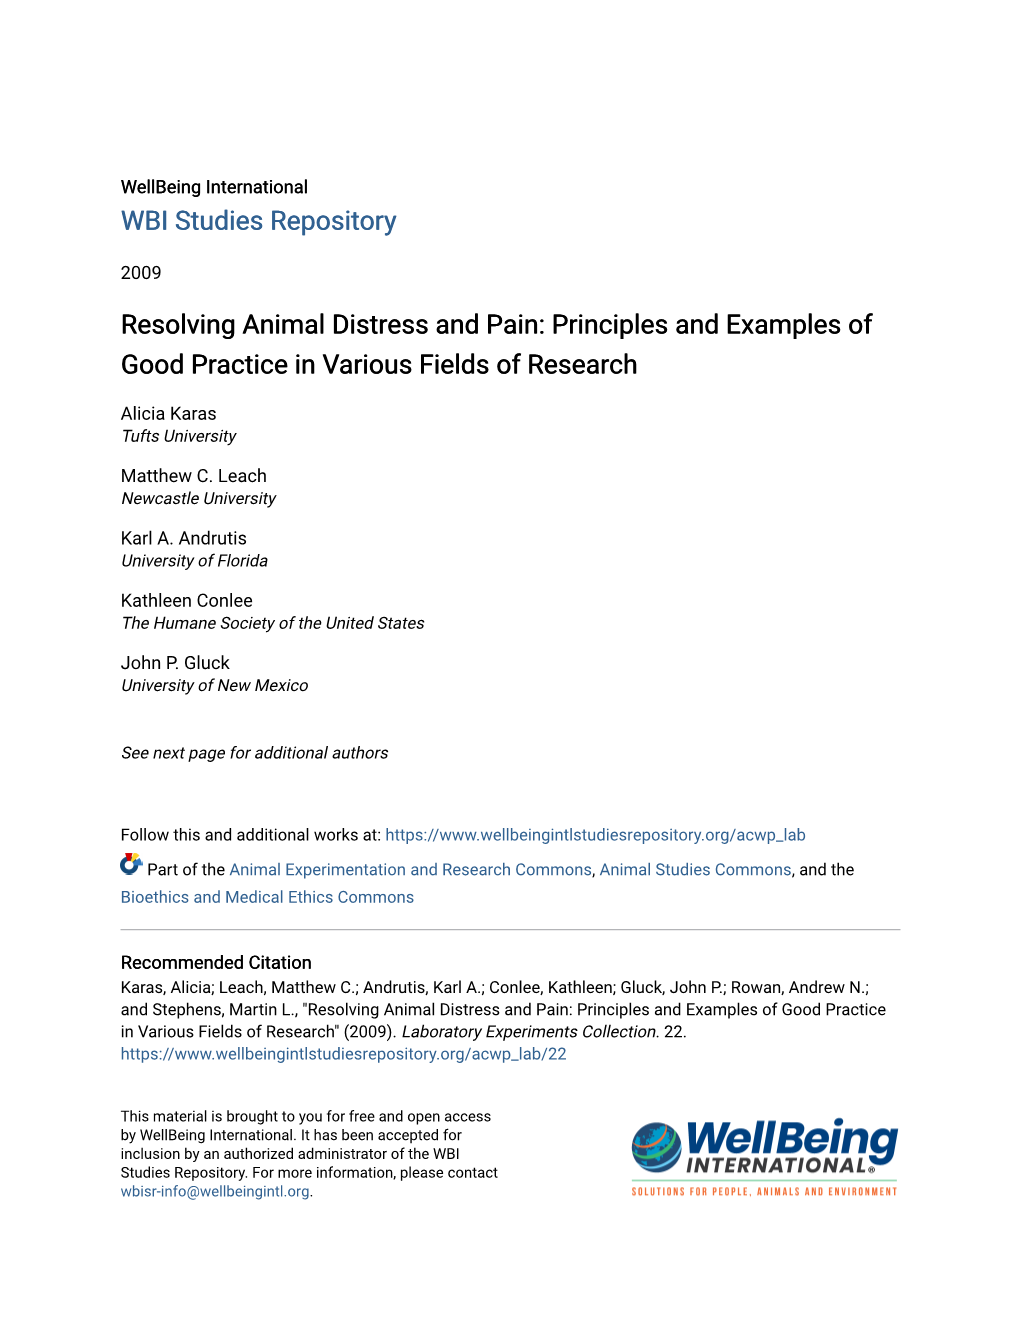 Resolving Animal Distress and Pain: Principles and Examples of Good Practice in Various Fields of Research